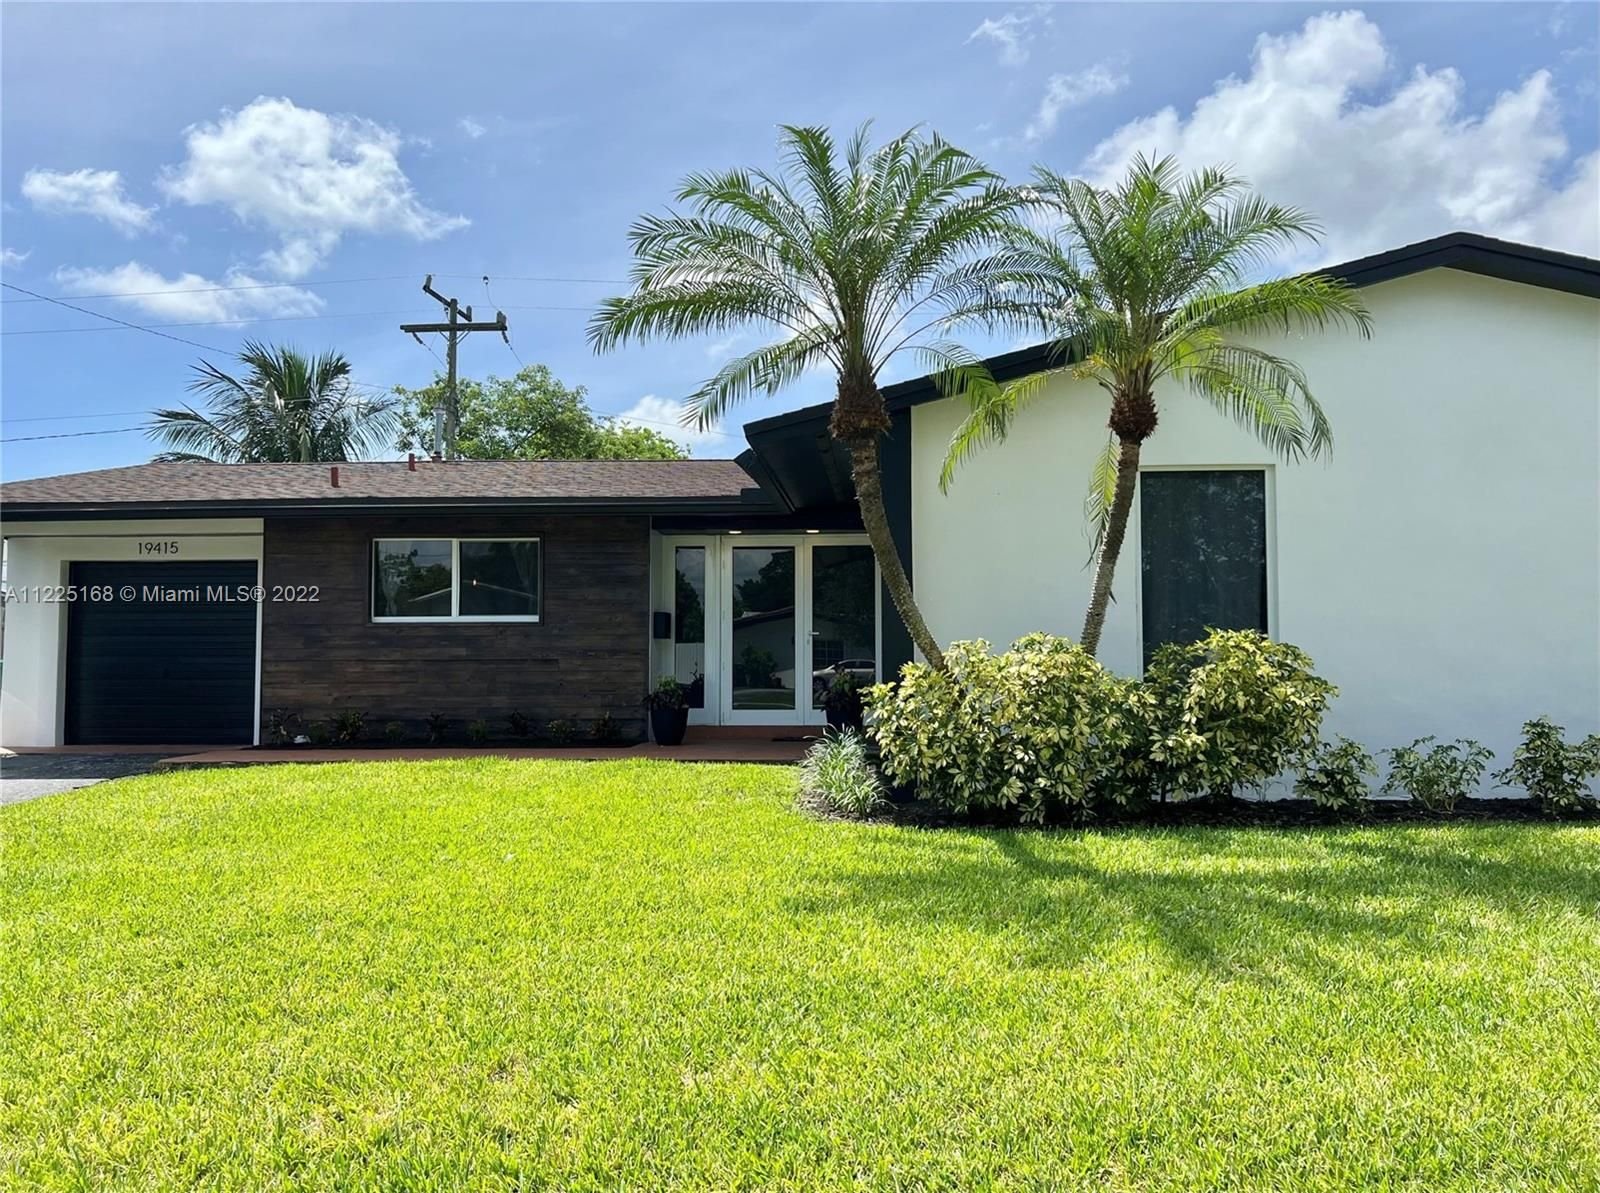 Real estate property located at 19415 Lenaire Dr, Miami-Dade County, Cutler Bay, FL